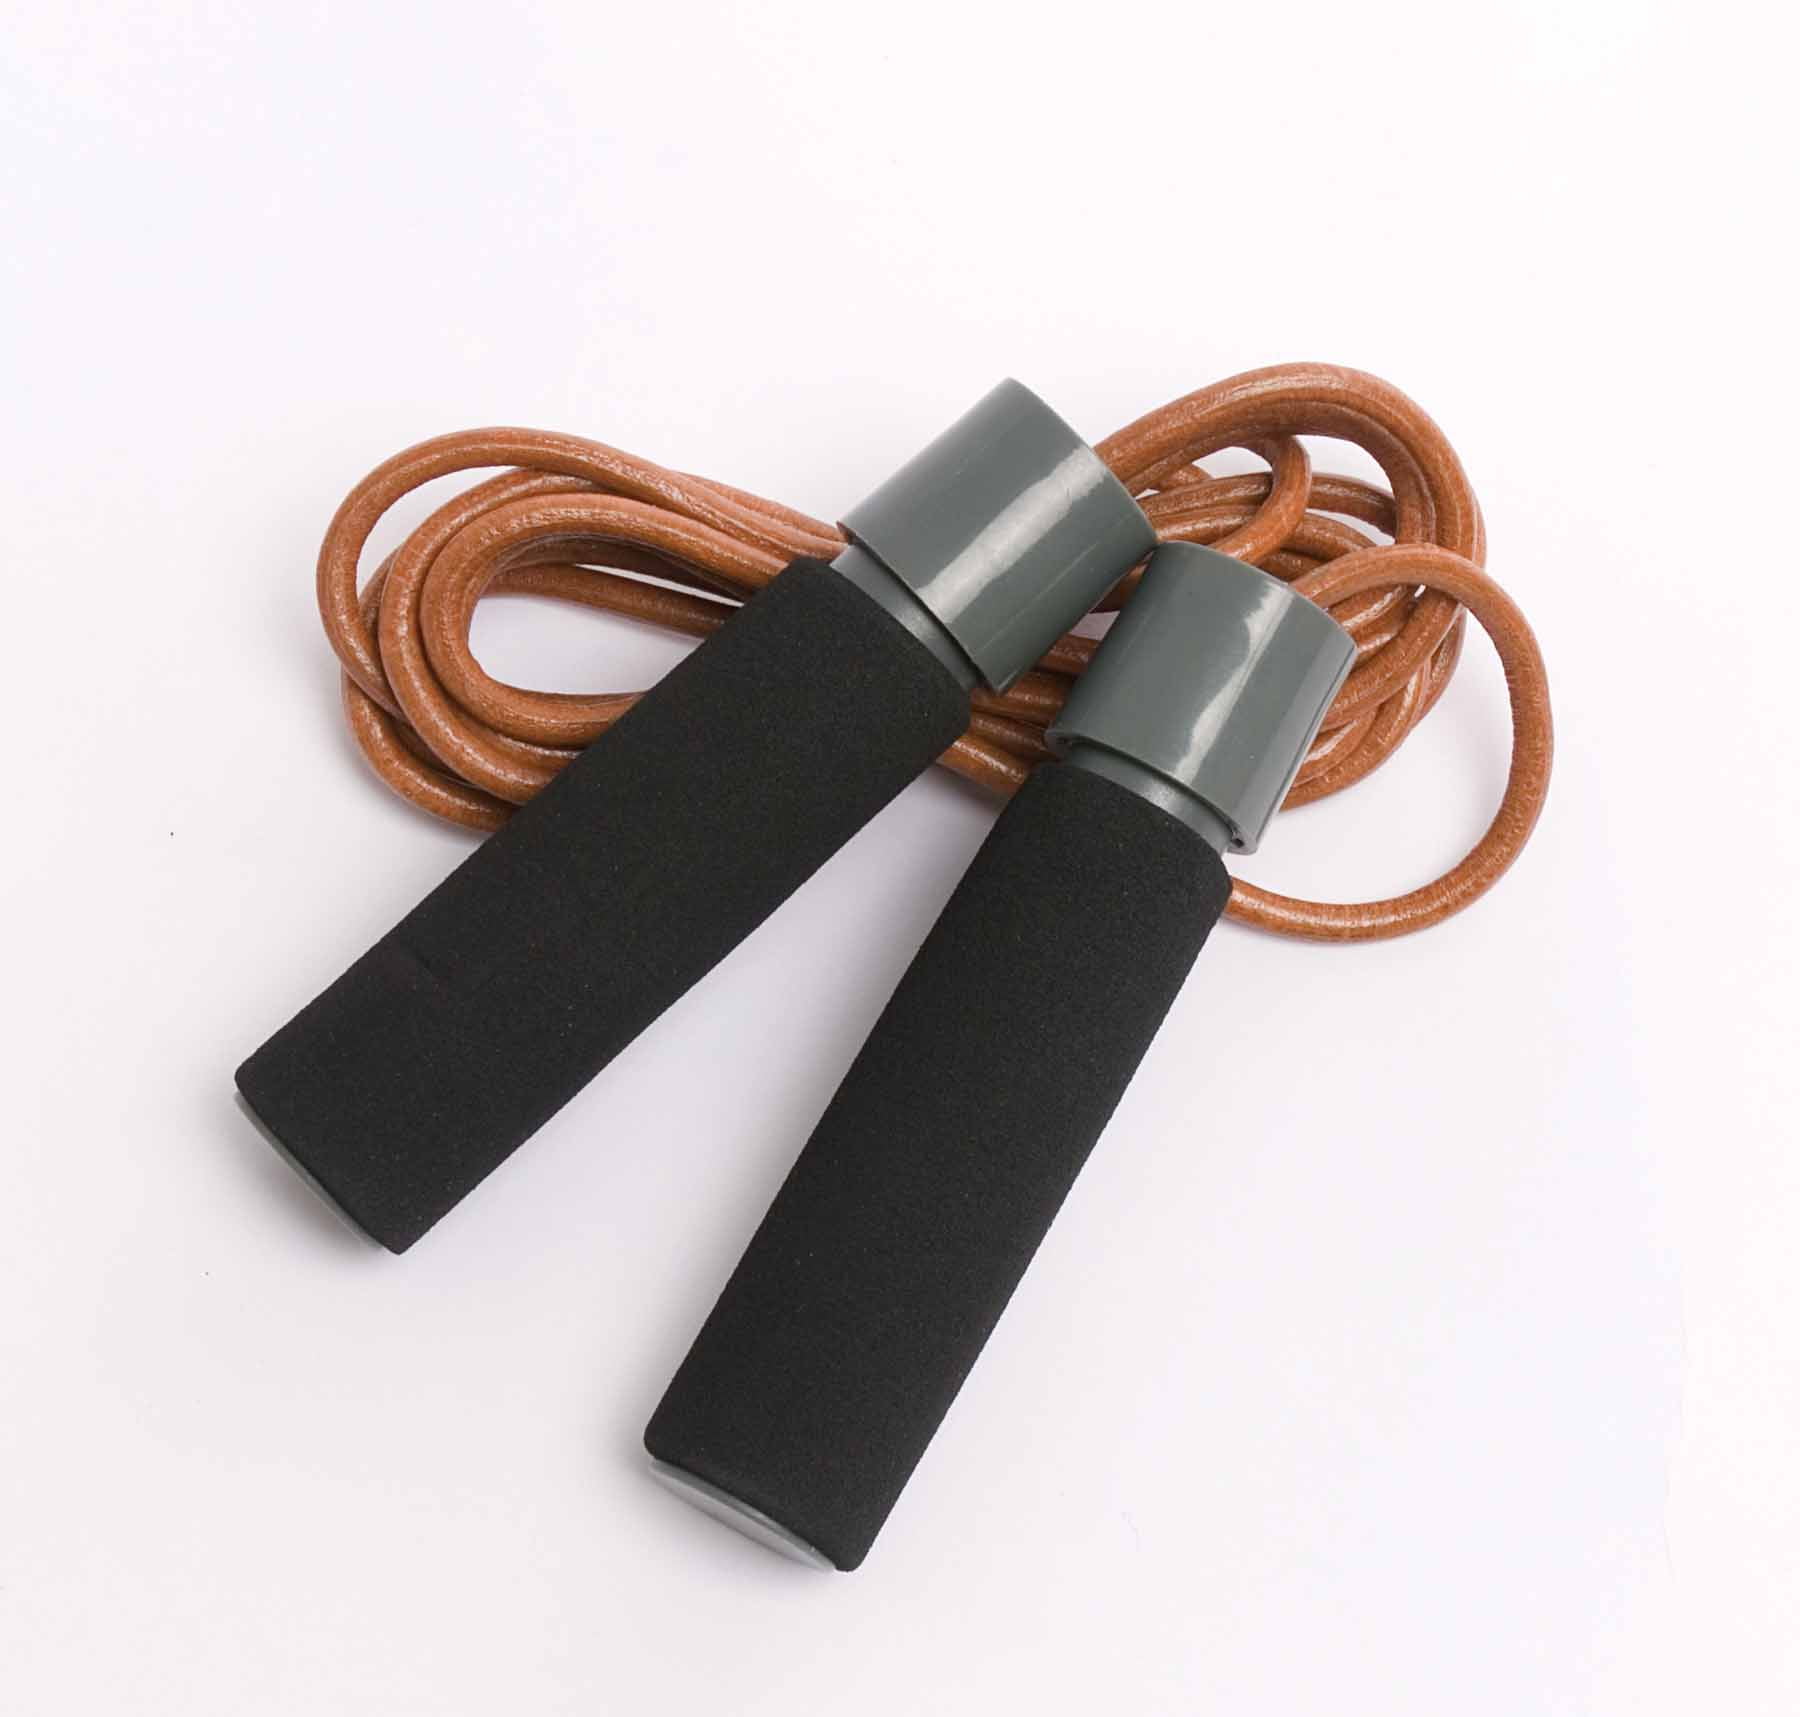 Details about   Heavy Skipping Rope Jump Speed Exercise Boxing Gym Fitness Workout Adult 